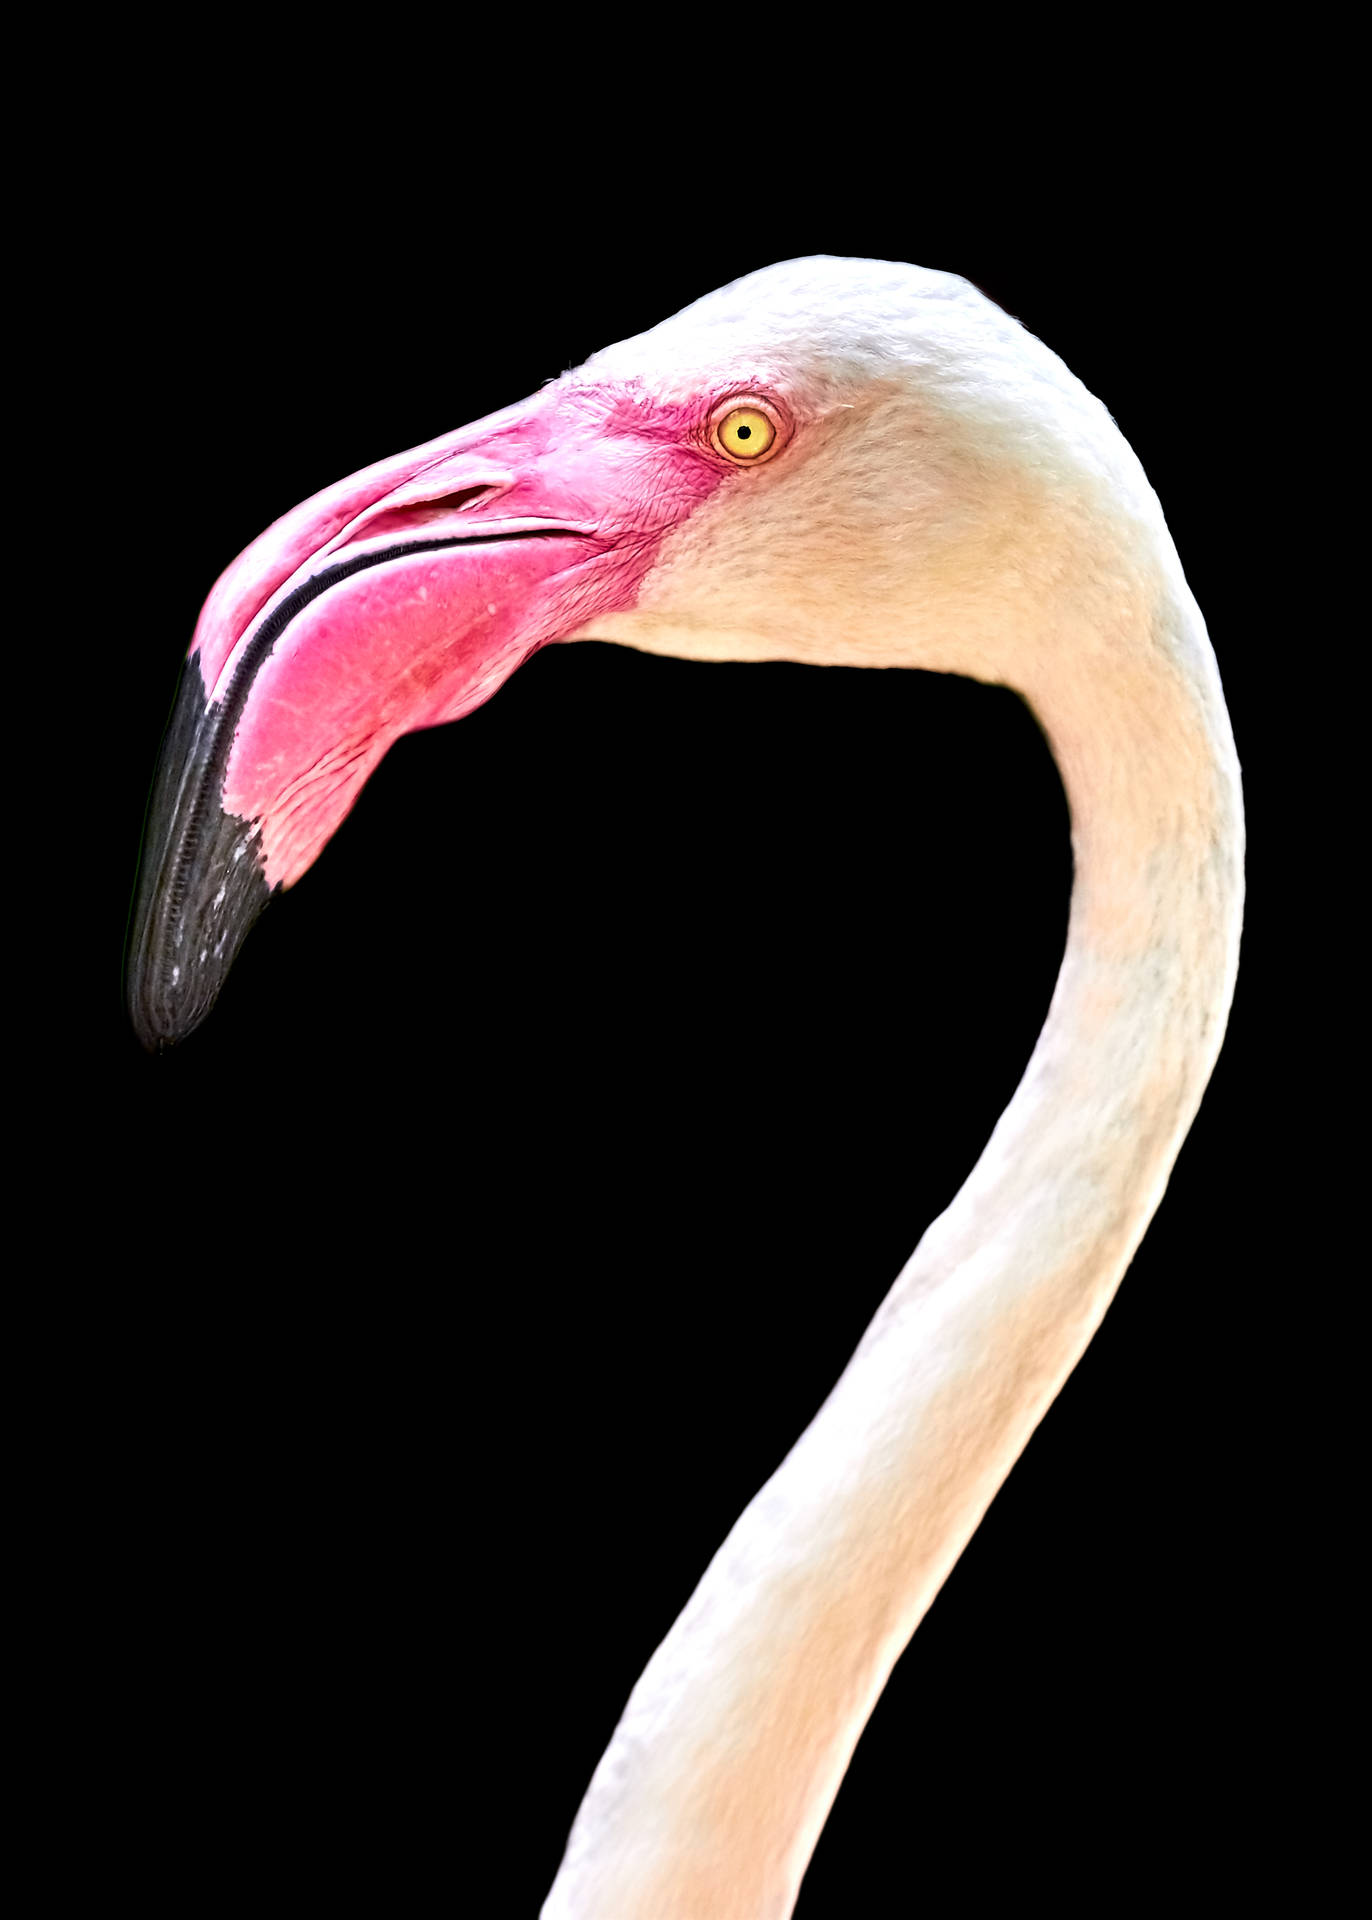 Flamingo 2336X3270 Wallpaper and Background Image